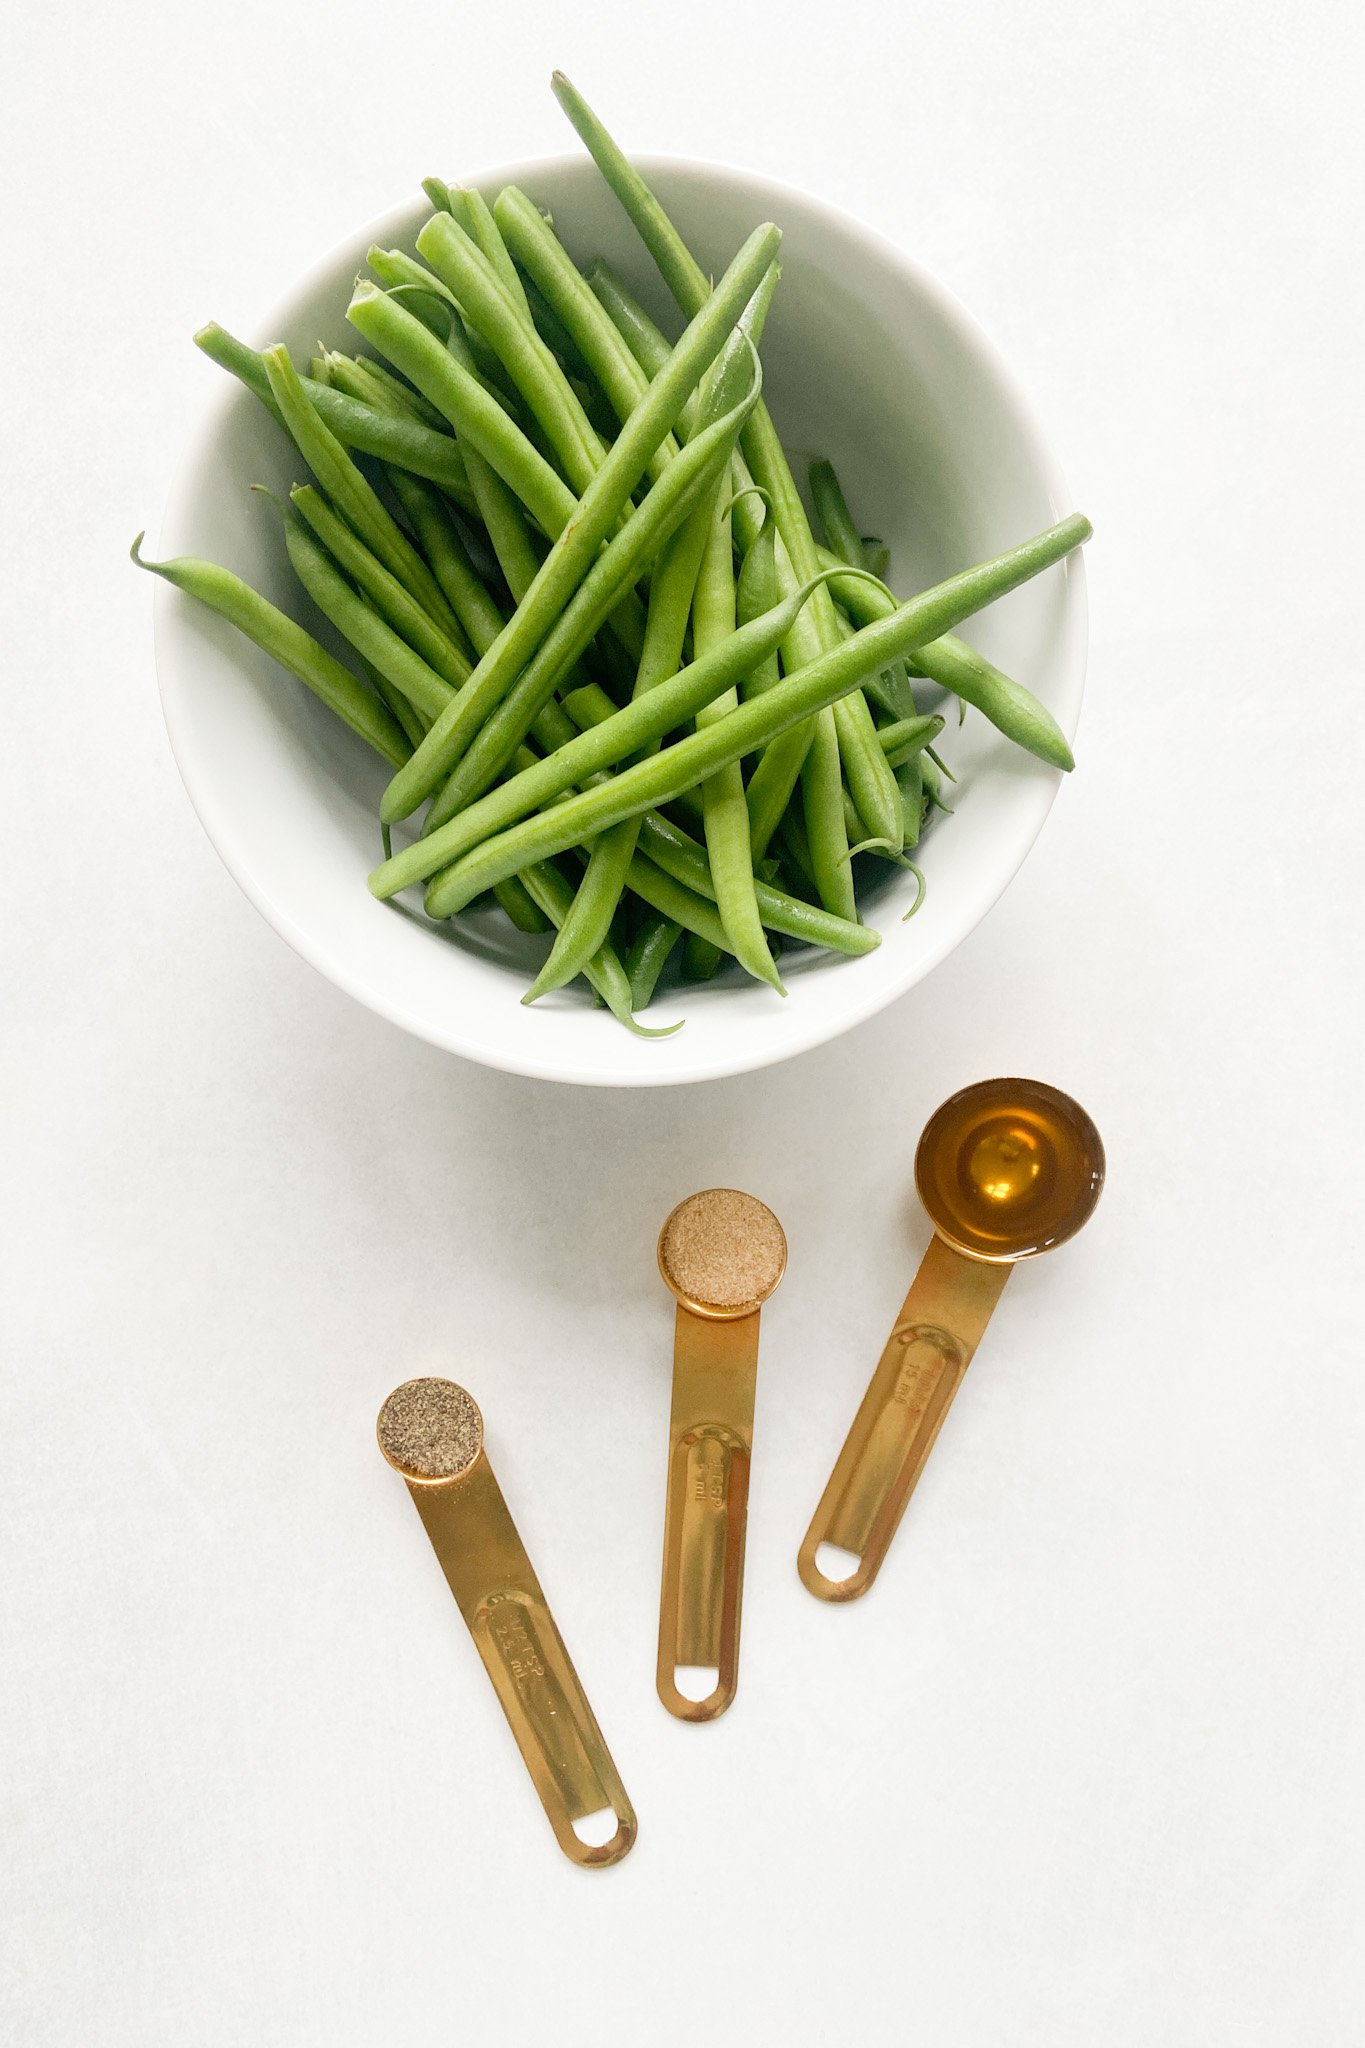 Ingredients to make air fryer green beans. See recipe card for detailed ingredient quantities.